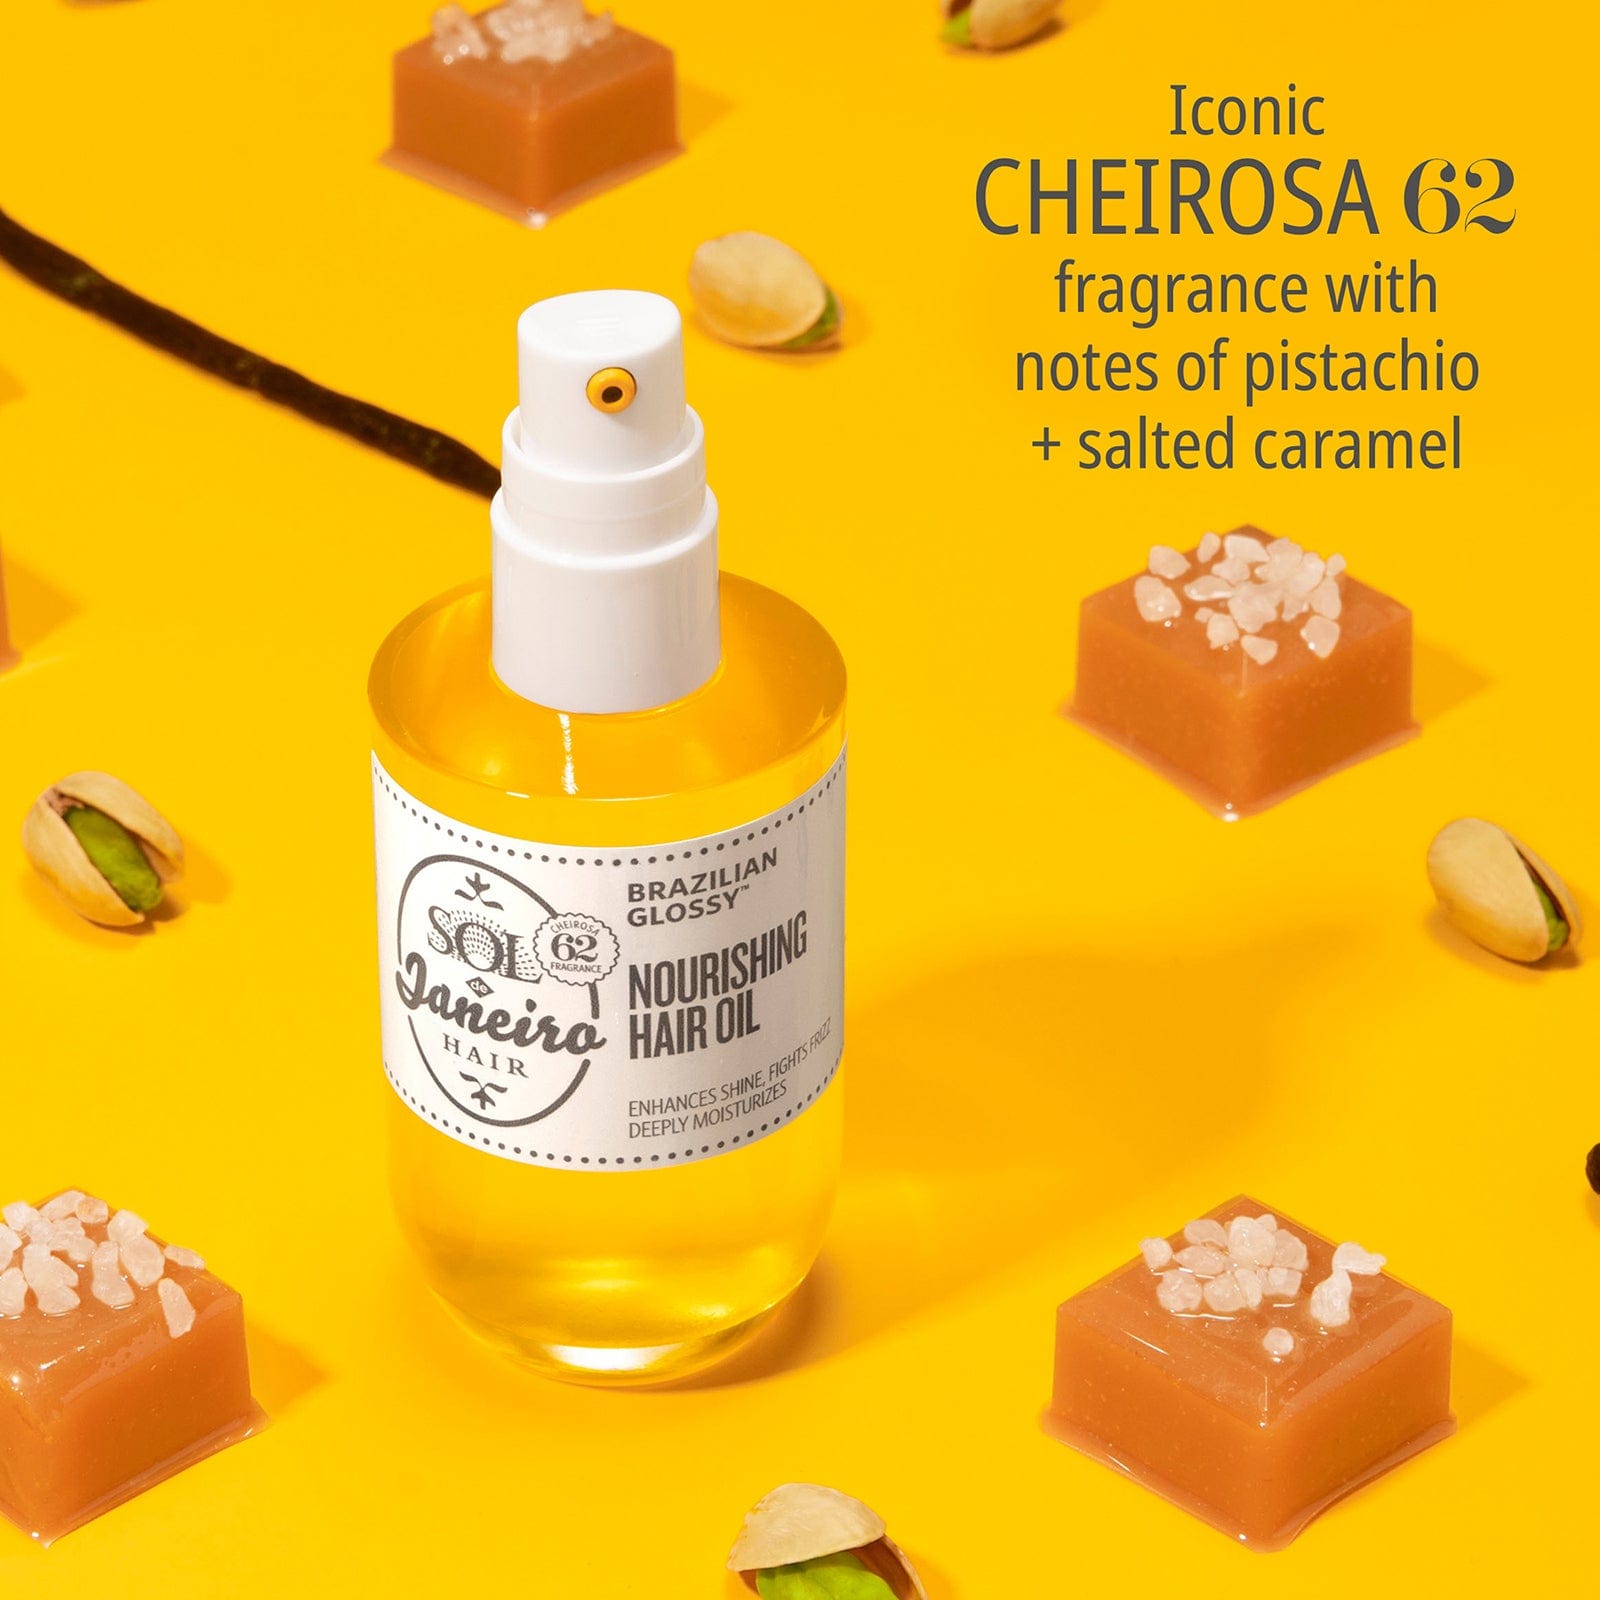 Iconic Cheirosa 62 fragrance with notes of pistachio + salted caramel 